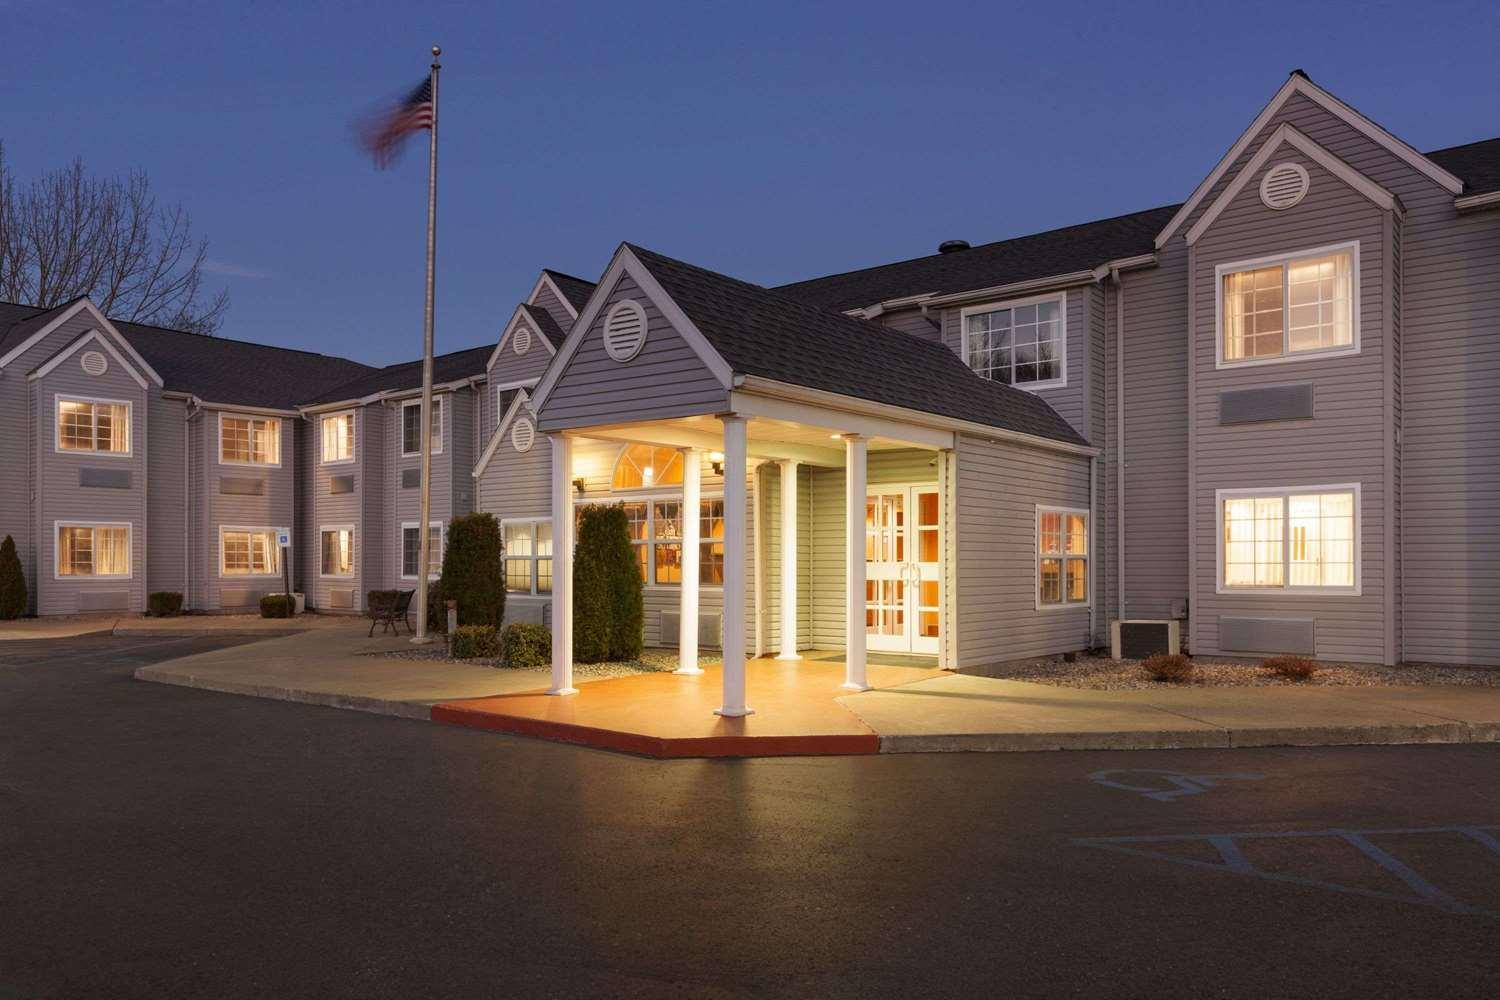 Microtel Inn by Wyndham Albany Airport in Latham, NY